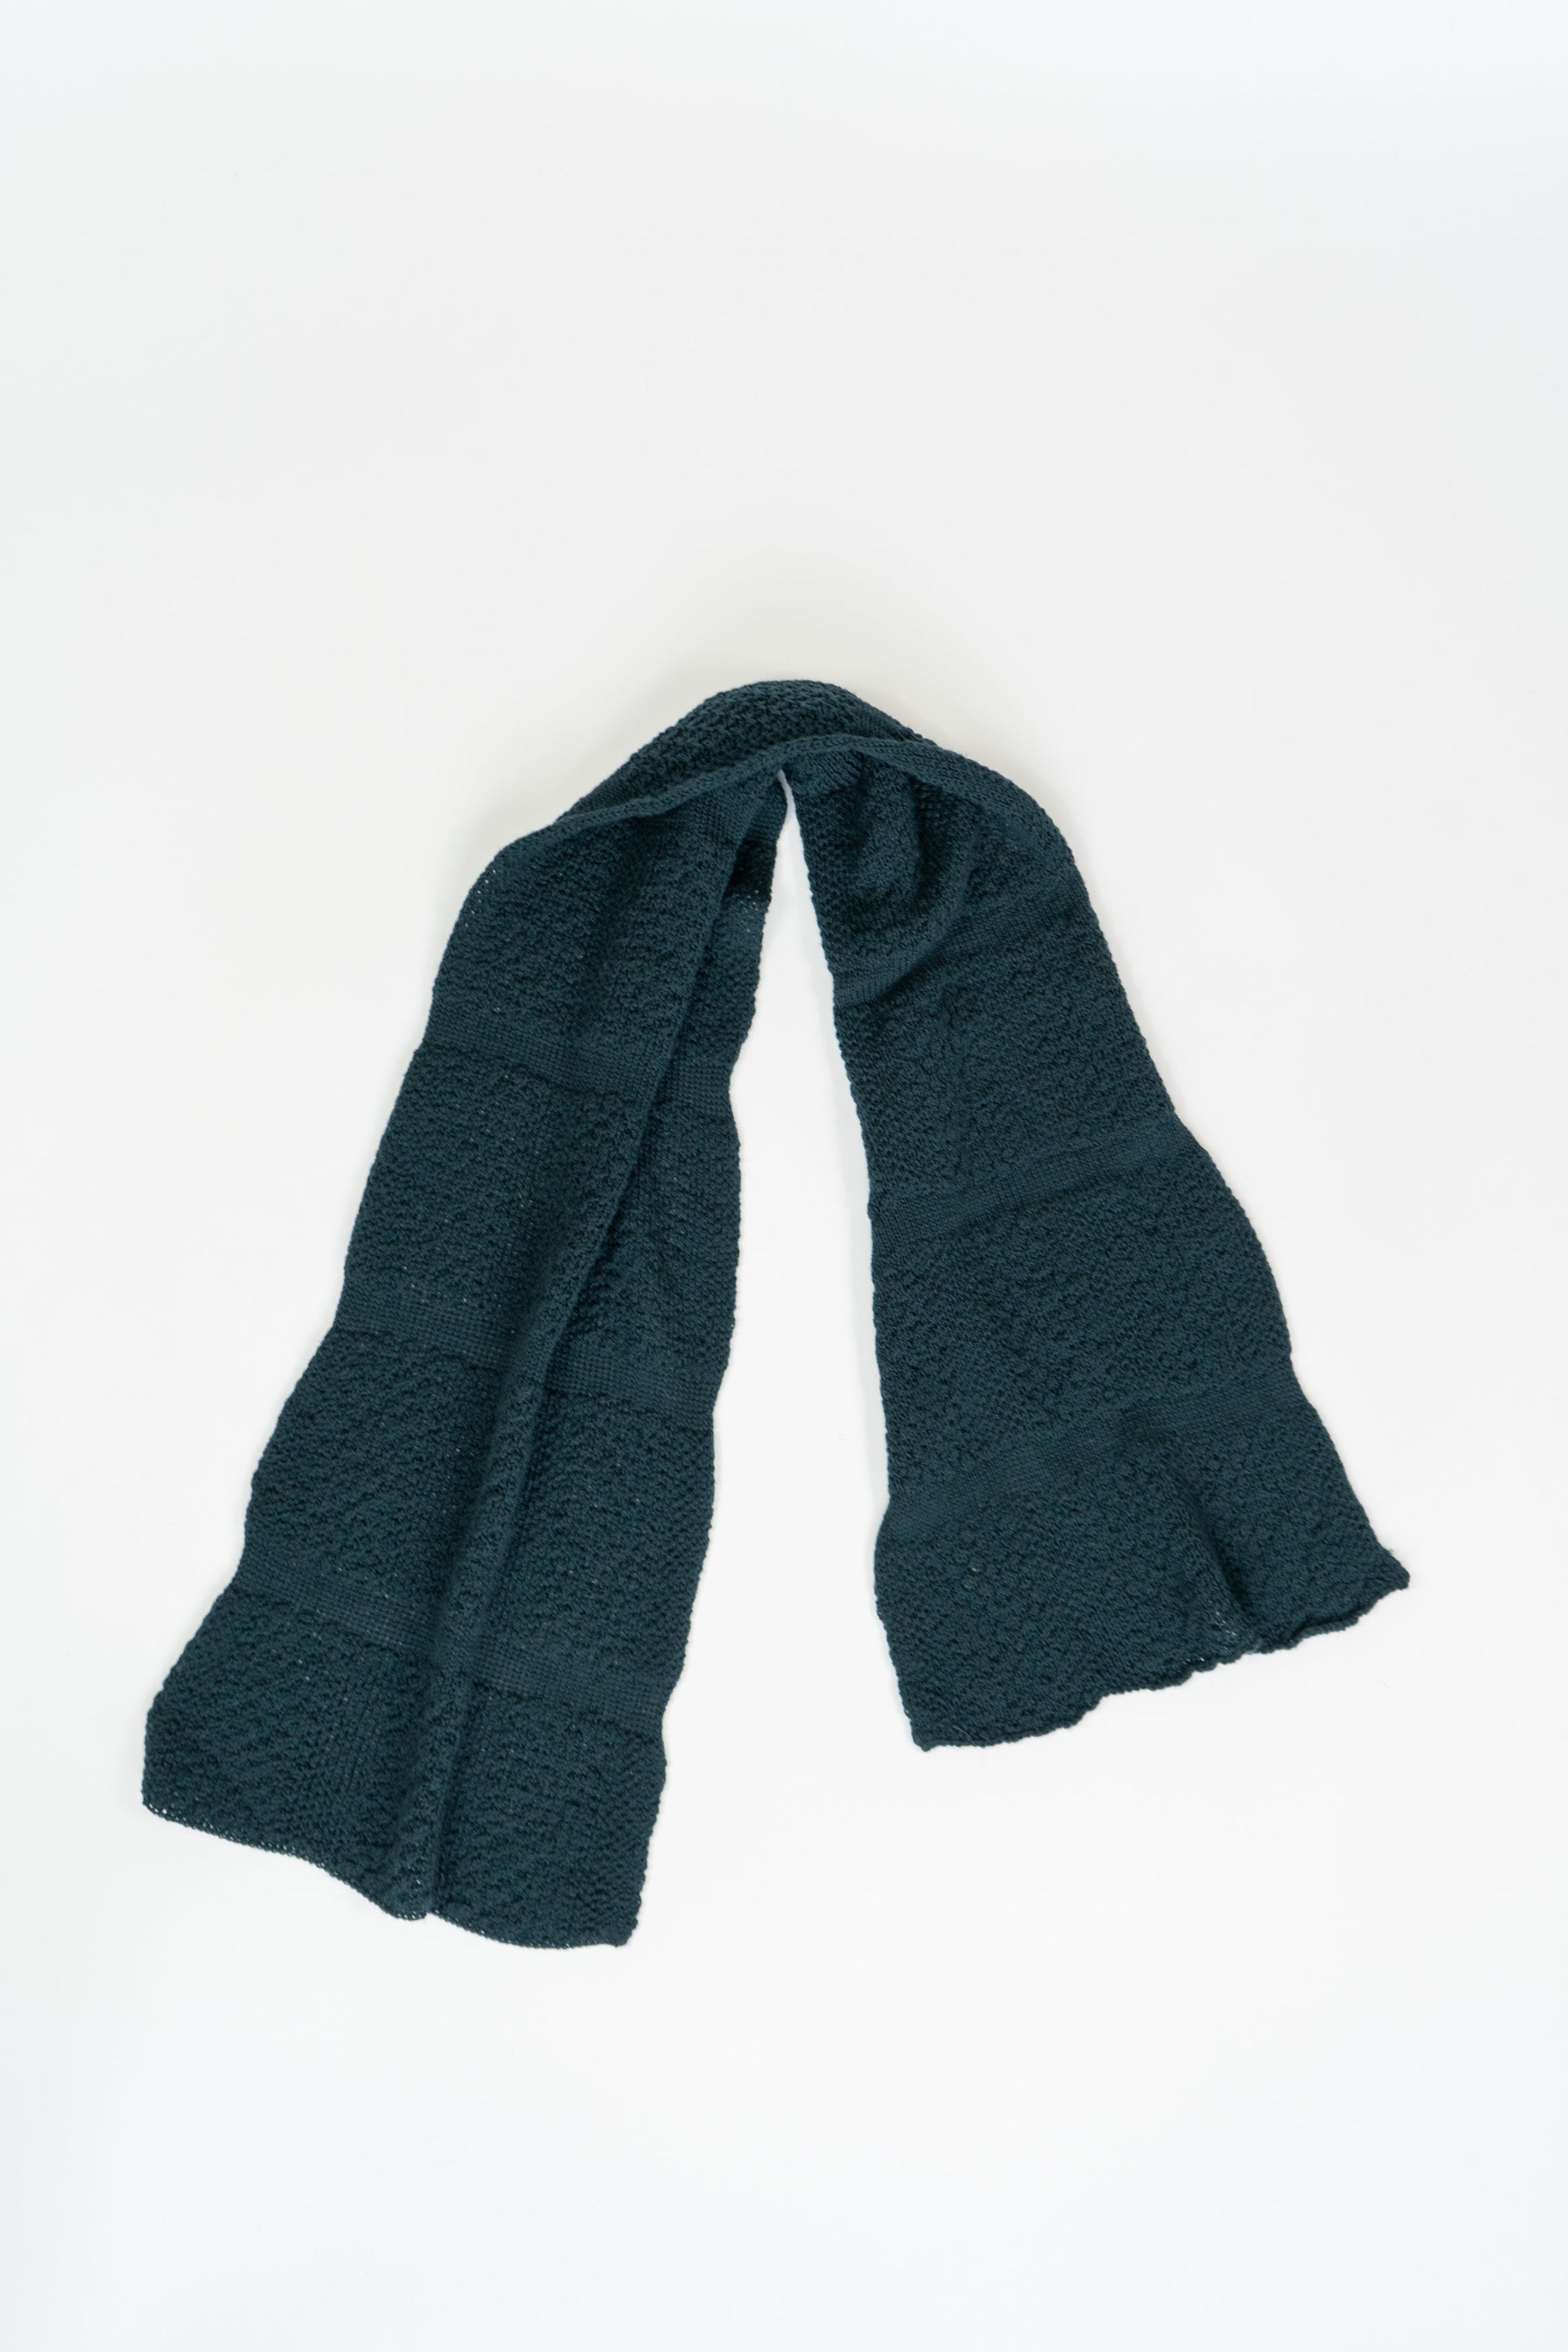 Bottle Green Small Merino Scarf-Scarves & Shawls-STABLE of Ireland